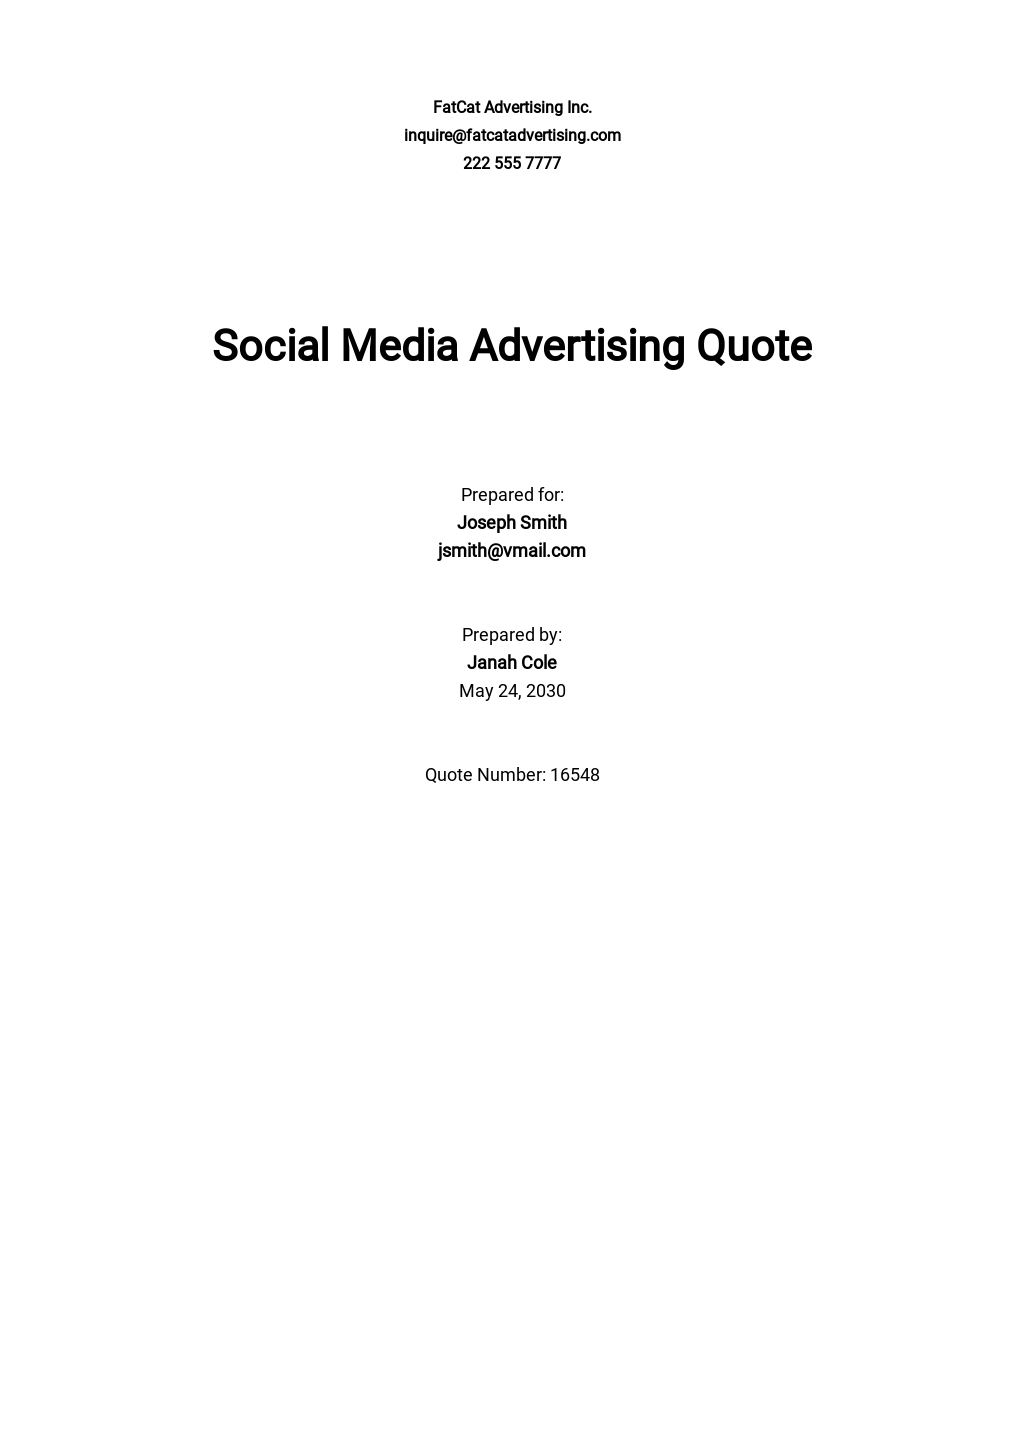 Sample Advertising Quotation Template - Google Docs, Google Sheets, Excel, Word